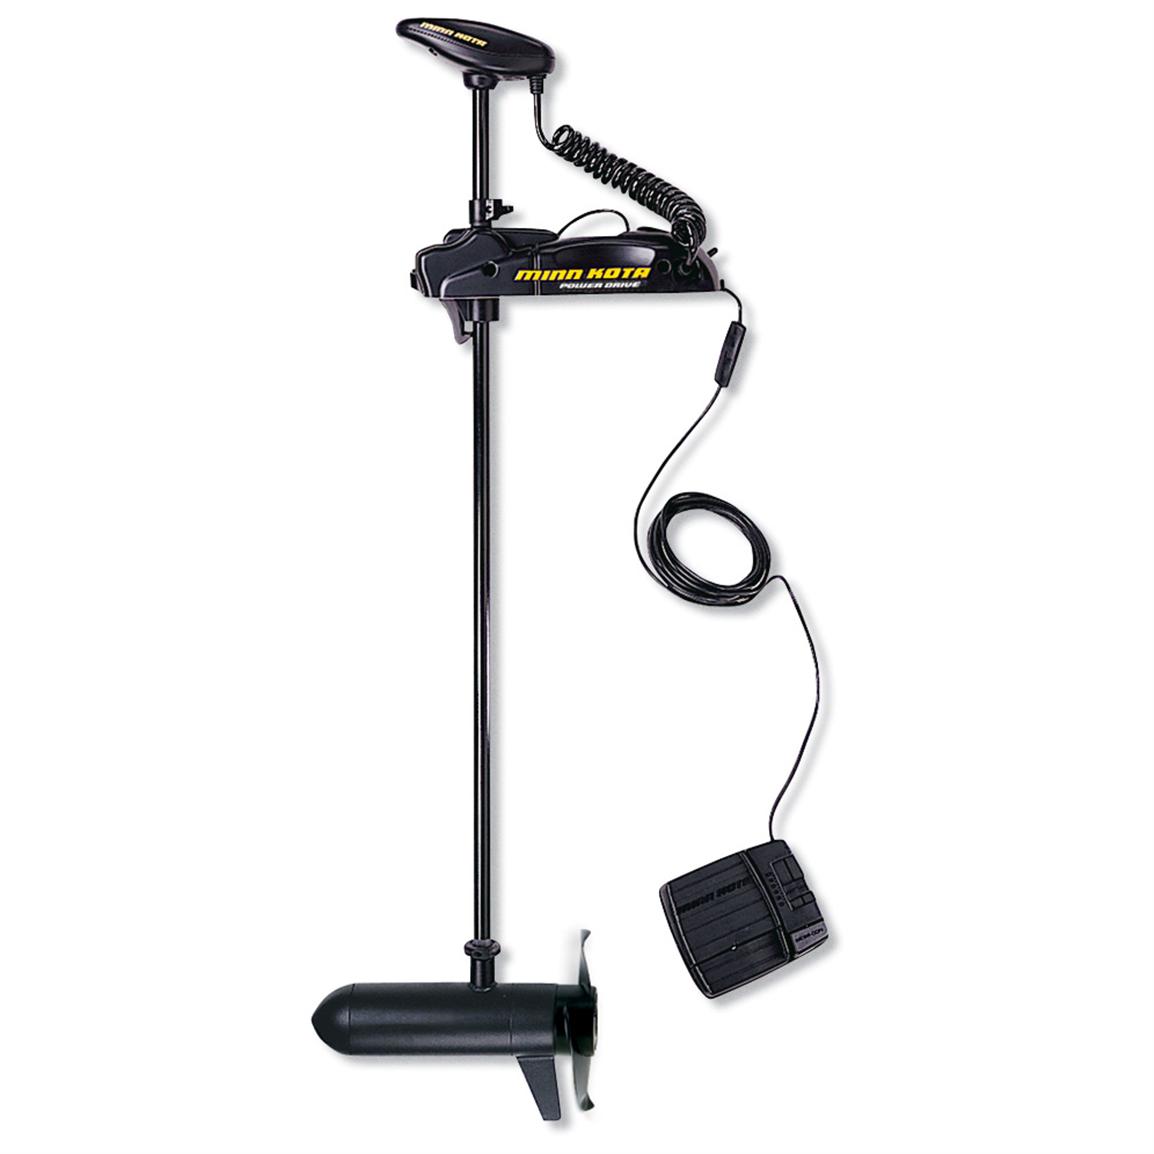 Powerdrive V2 Bow-Mount 70 PD BT wiht I-Pilot US2 - Click Image to Close